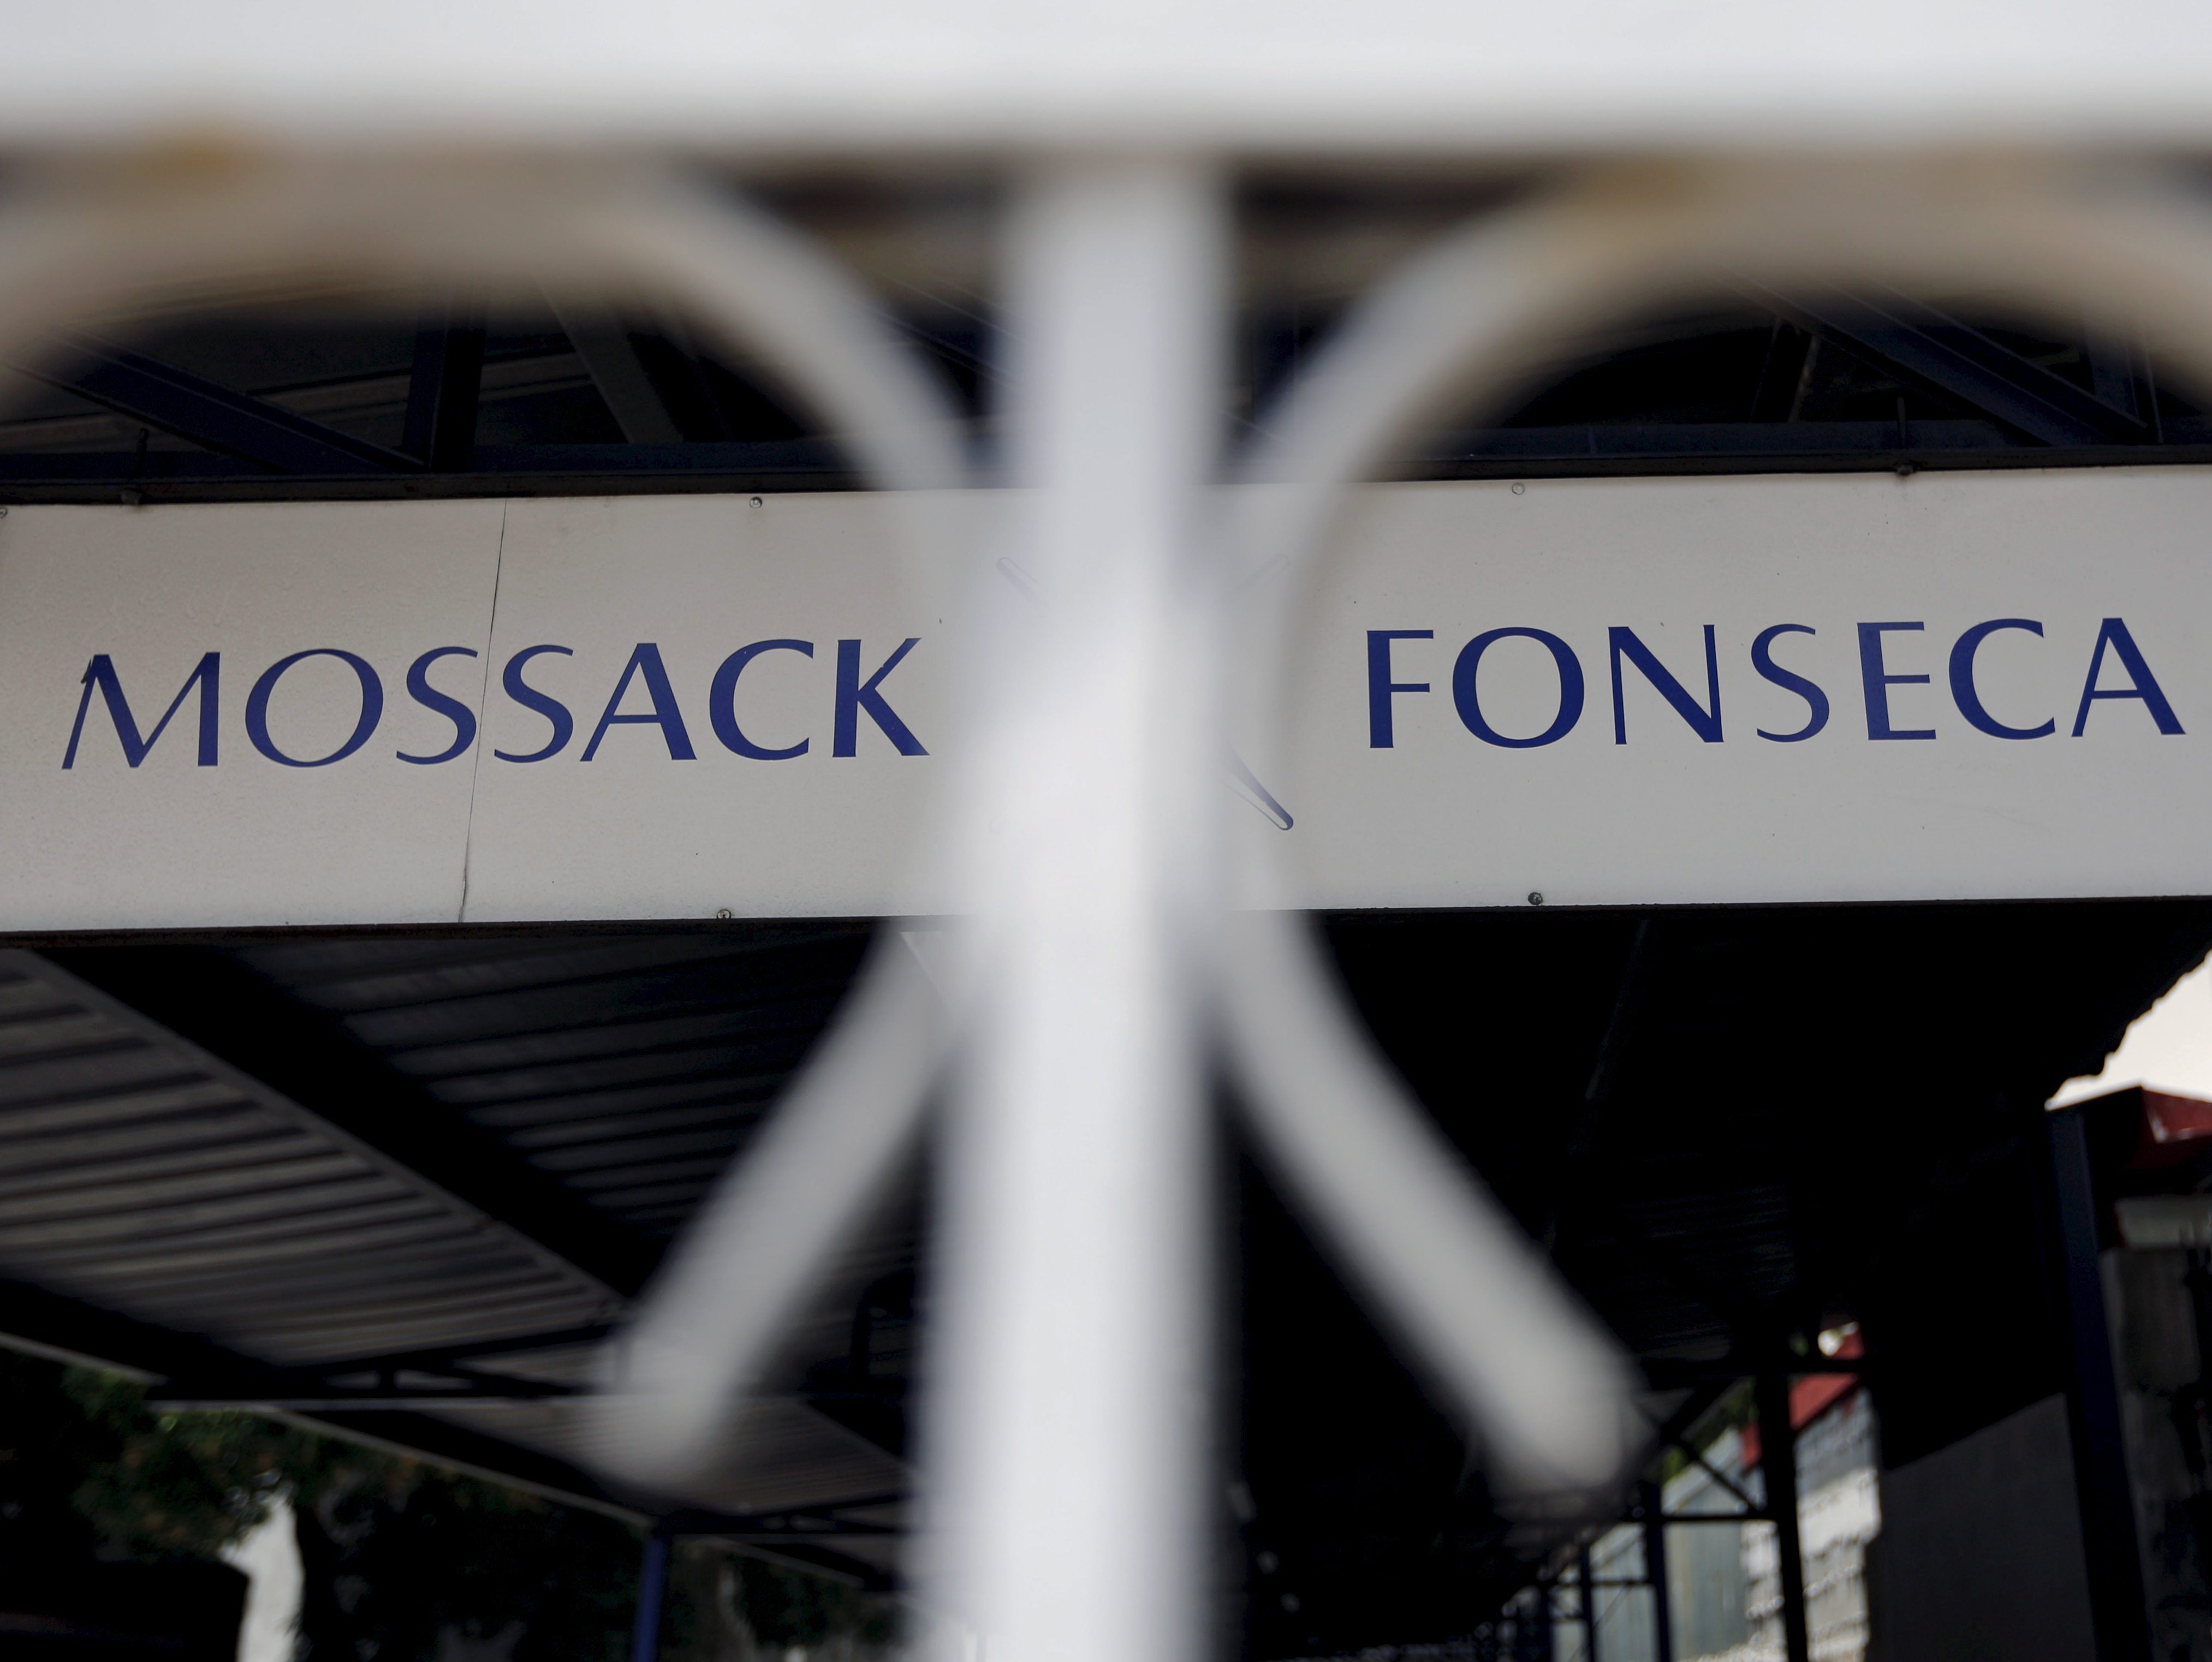 Panama Papers investigation wins Pulitzer Prize